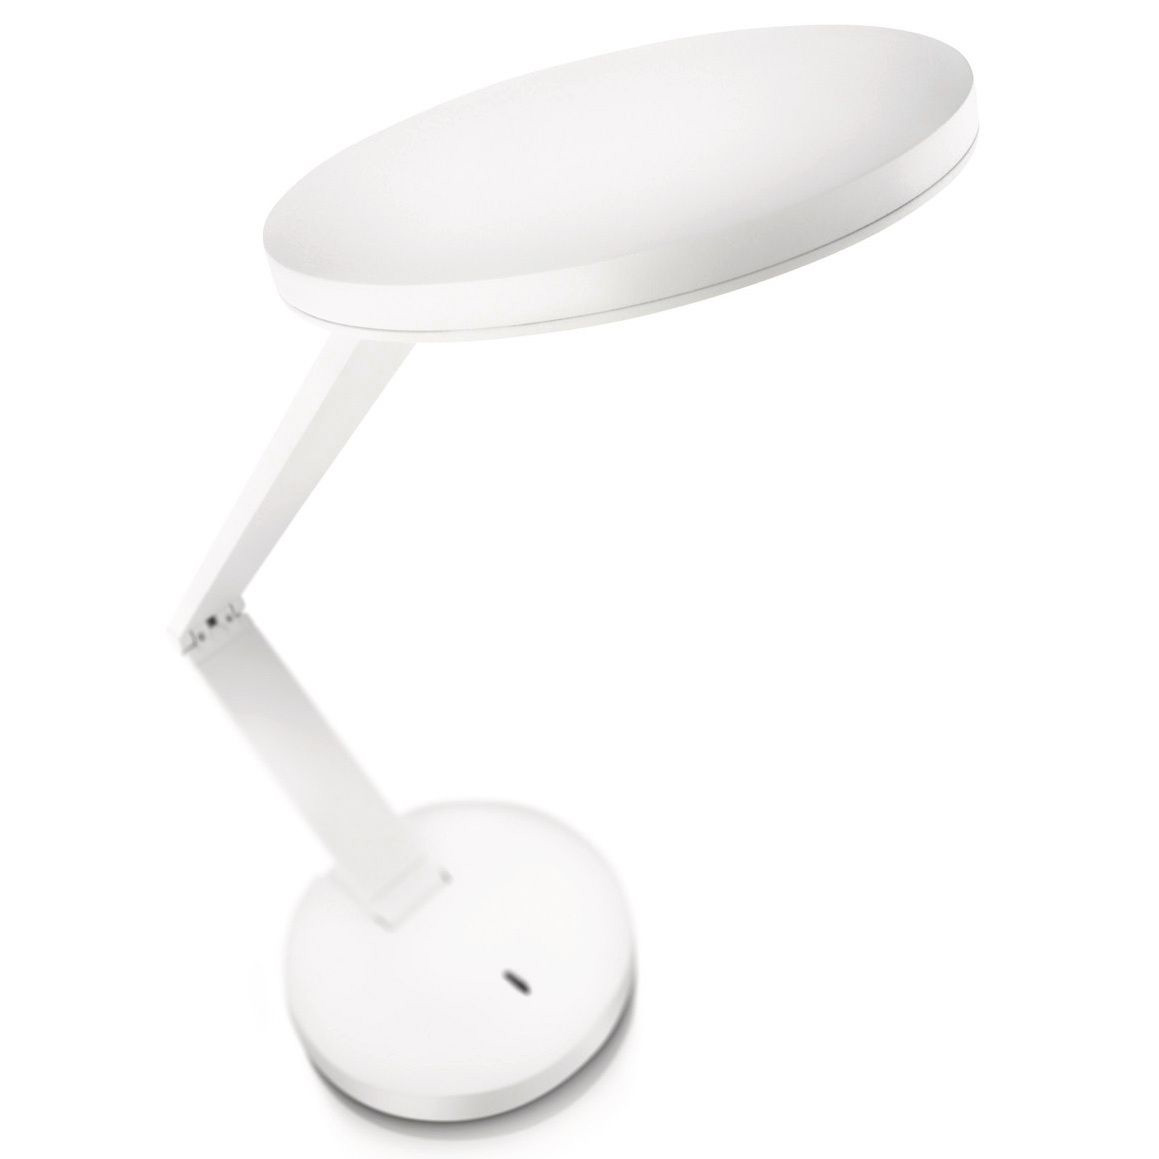 Desk LED lamp PHILIPS Instyle Roswell 2700K 6.5W 270lm